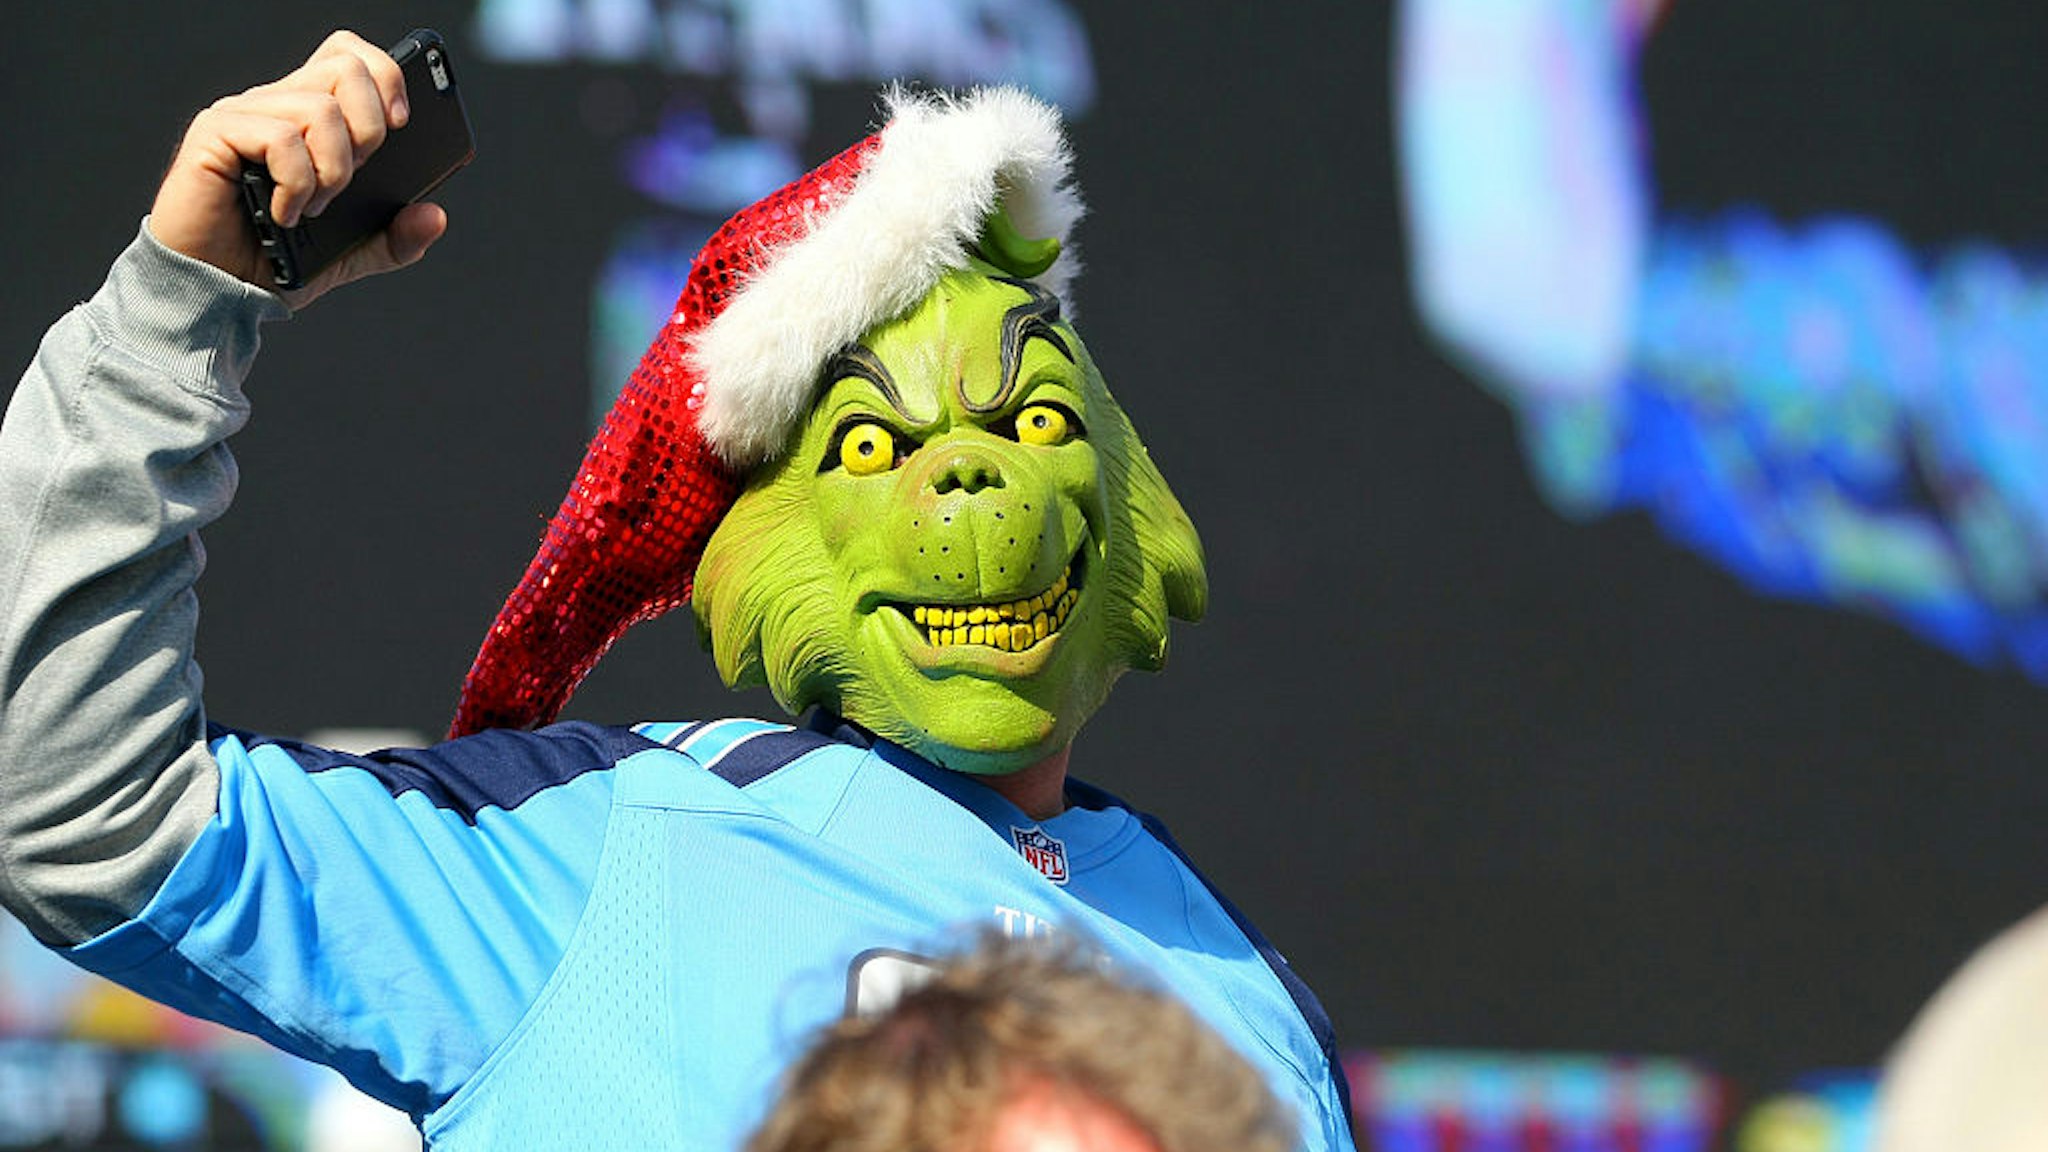 December 7, 2014: A Tennessee Titans fan is dressed as Dr. Suess' Grinch during game action.